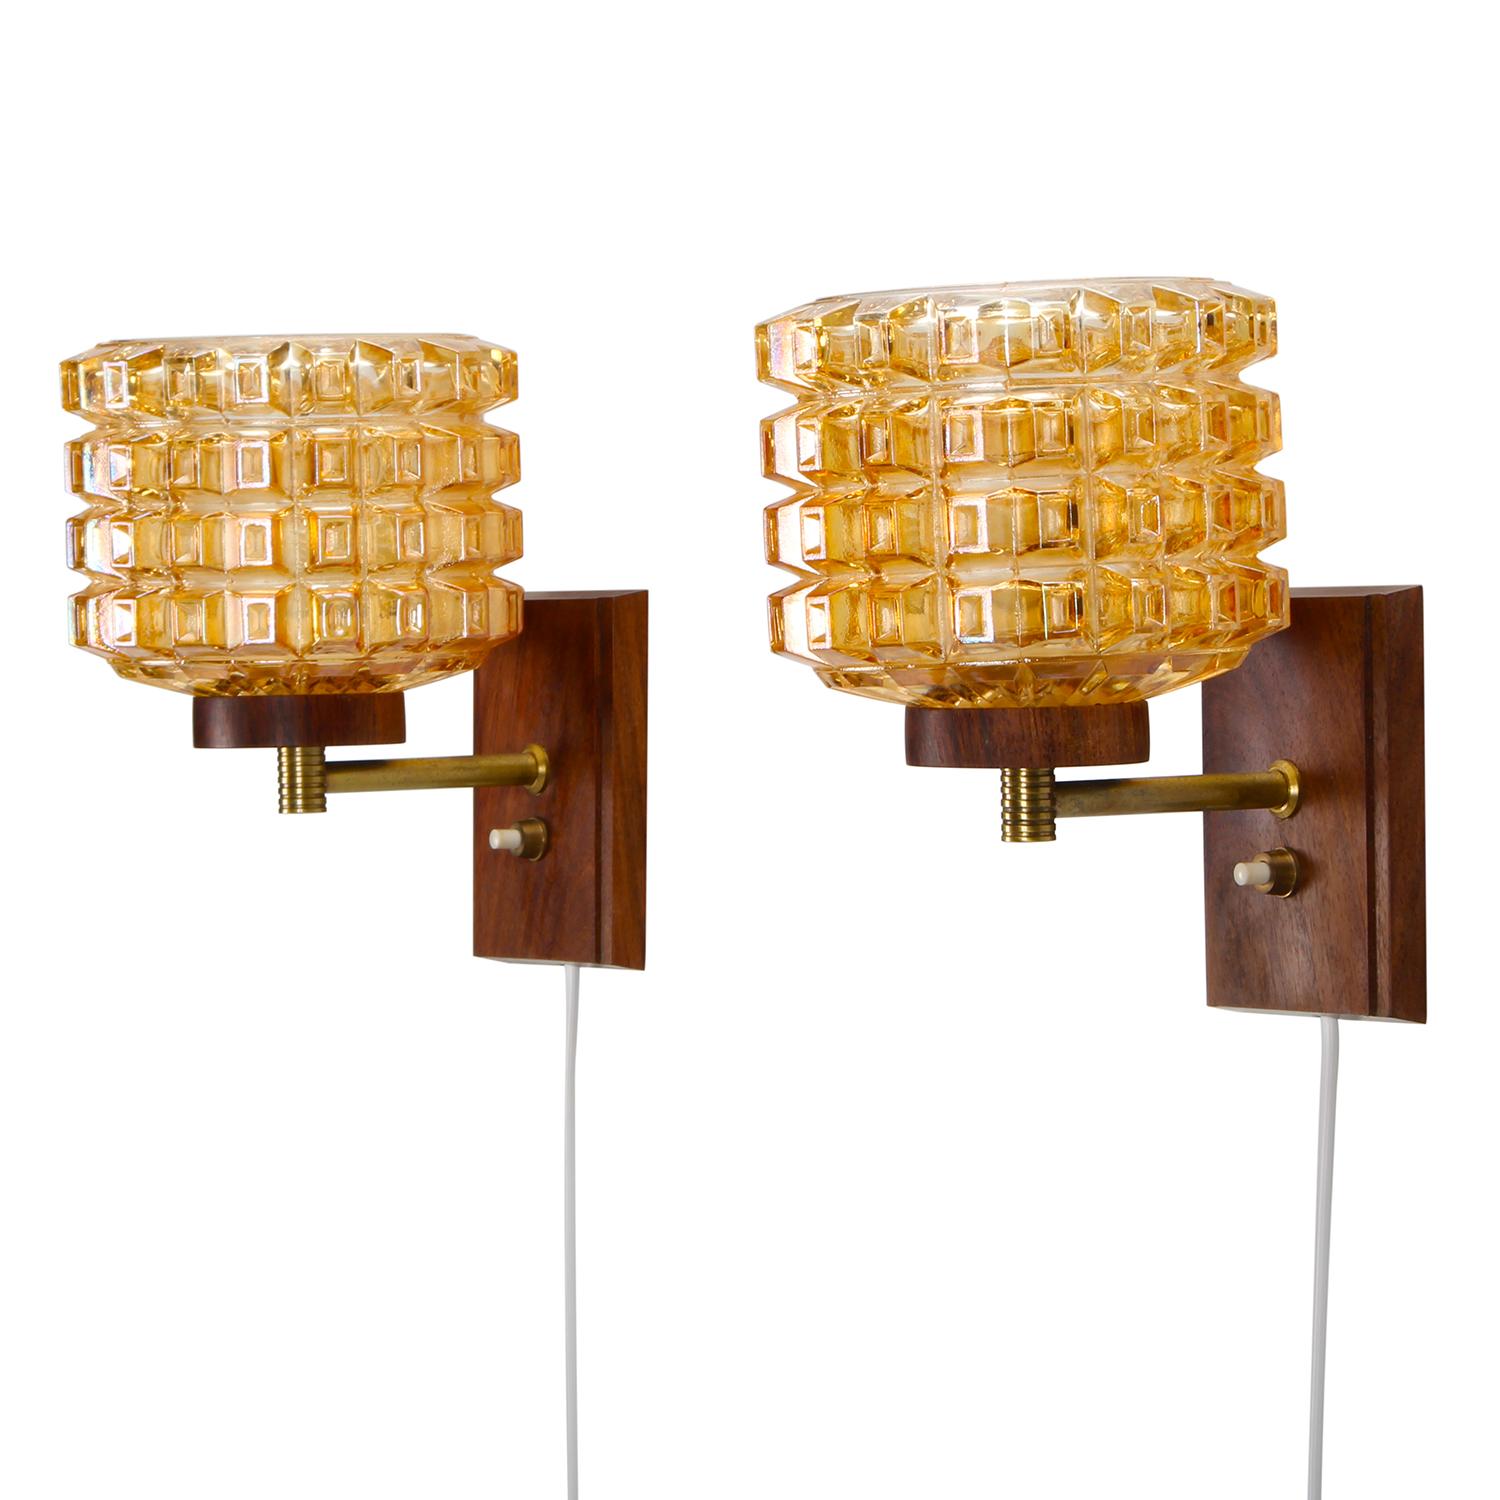 Mid-20th Century Pressed Glass & Rosewood Wall Lamps ‘Pair’ 1950s Scandinavian Midcentury Design